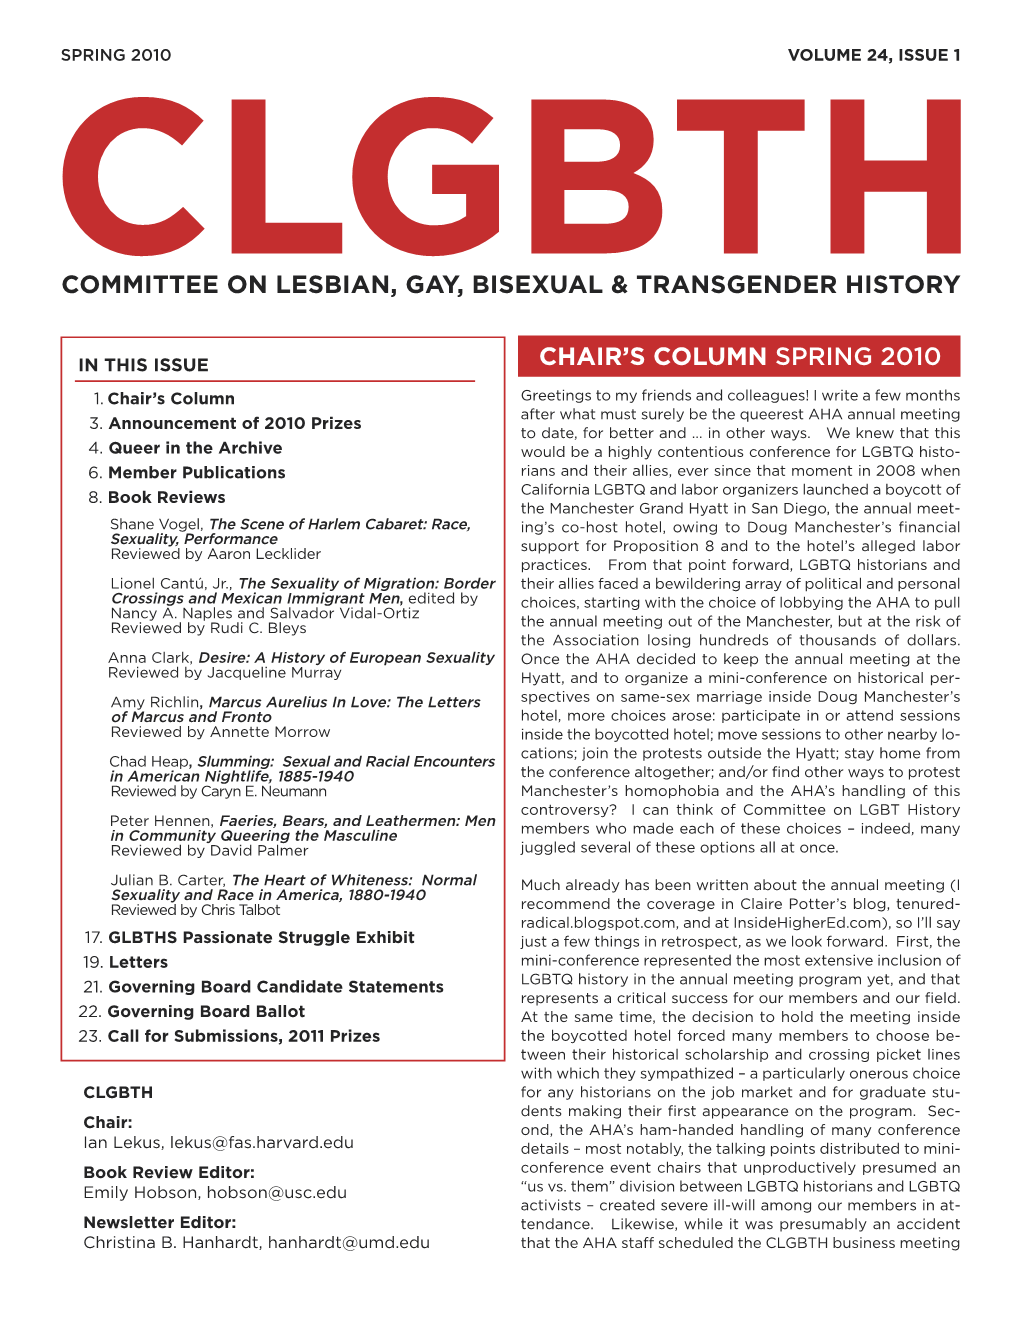 Spring 2010 Volume 24, Issue 1 Clgbth Committee on Lesbian, Gay, Bisexual & Transgender History